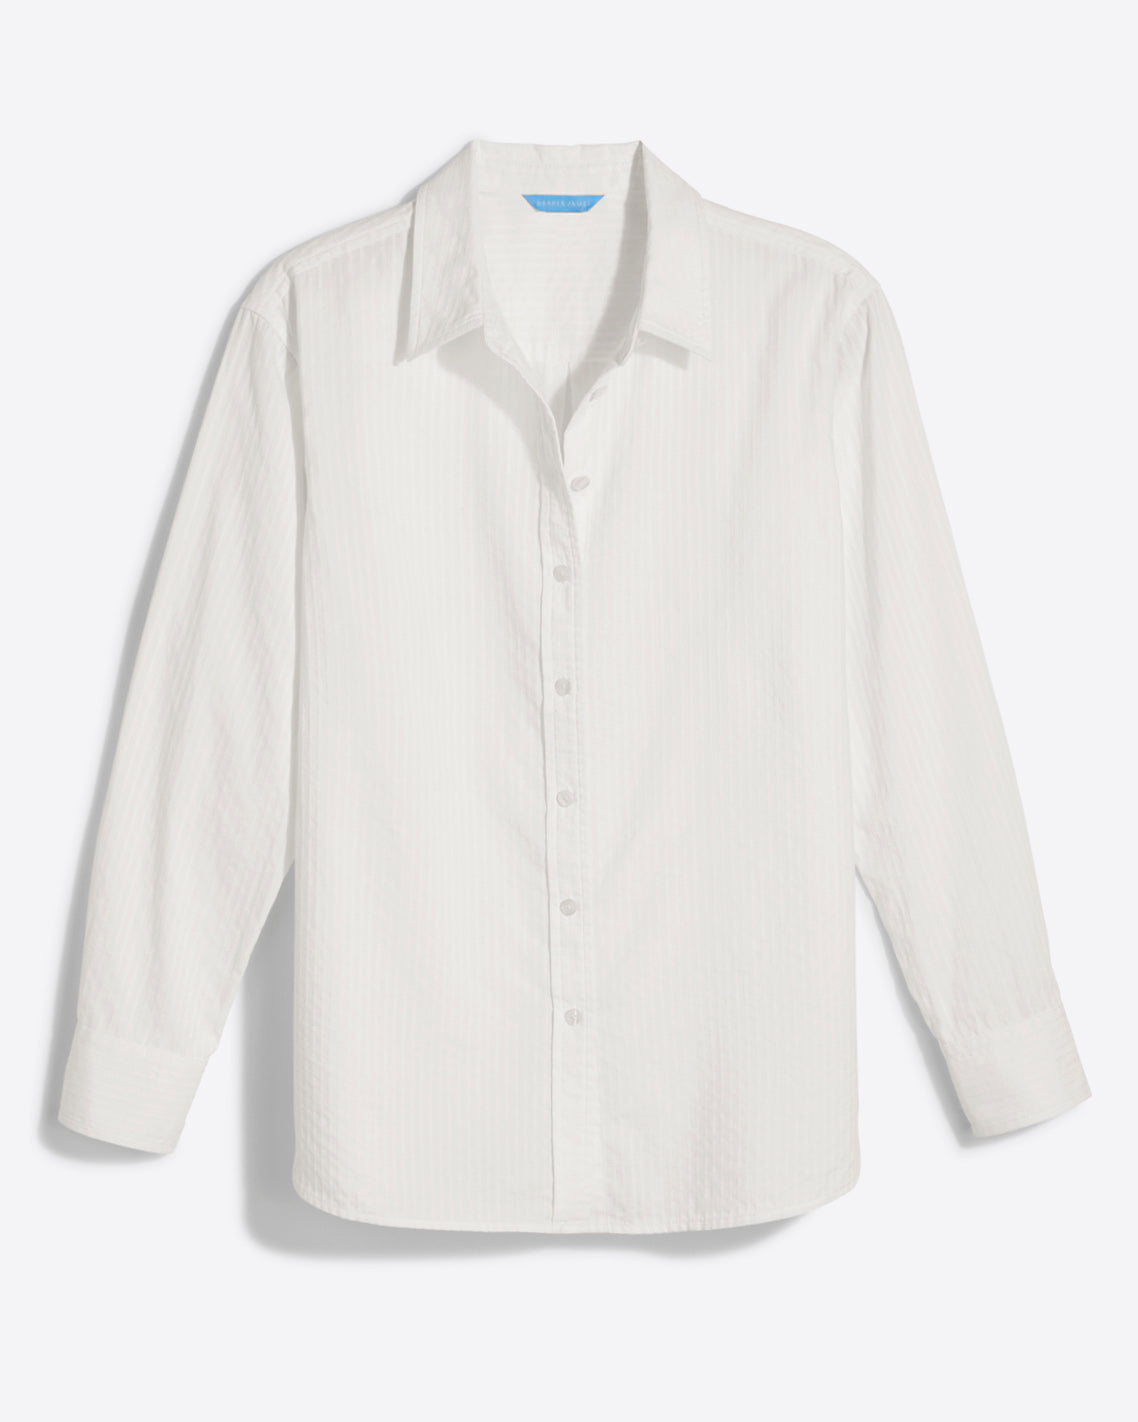 Button Down Top in White Shirting Stripe